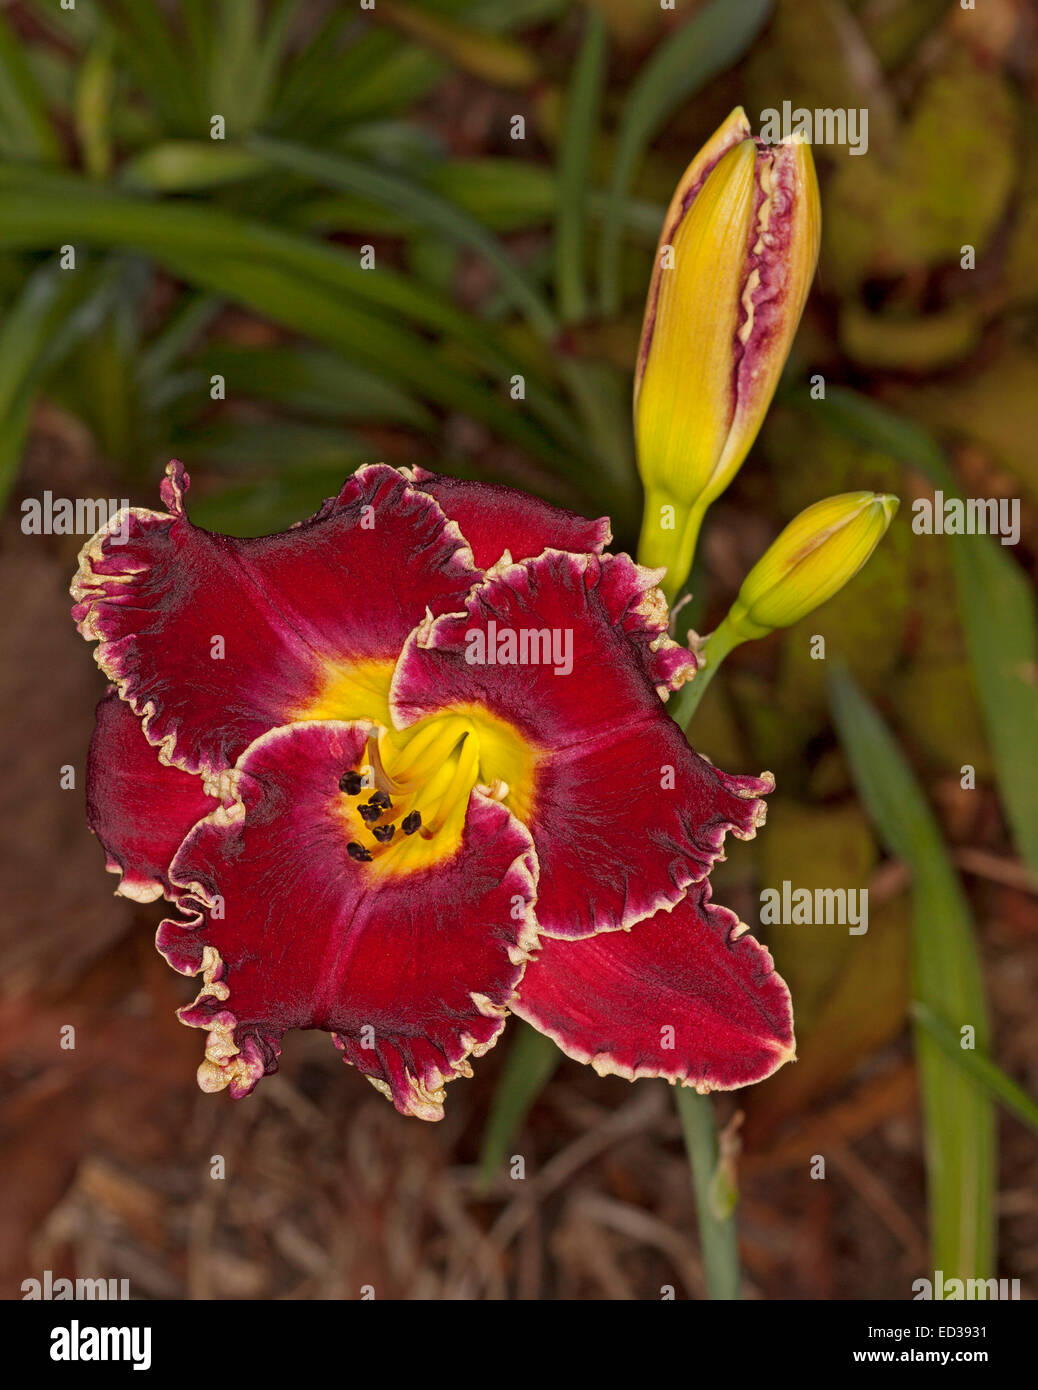 Spectacular dark red daylily flower, Larry's Obsession, yellow frilly edge to petals, two buds, backgrd of dark green foliage Stock Photo